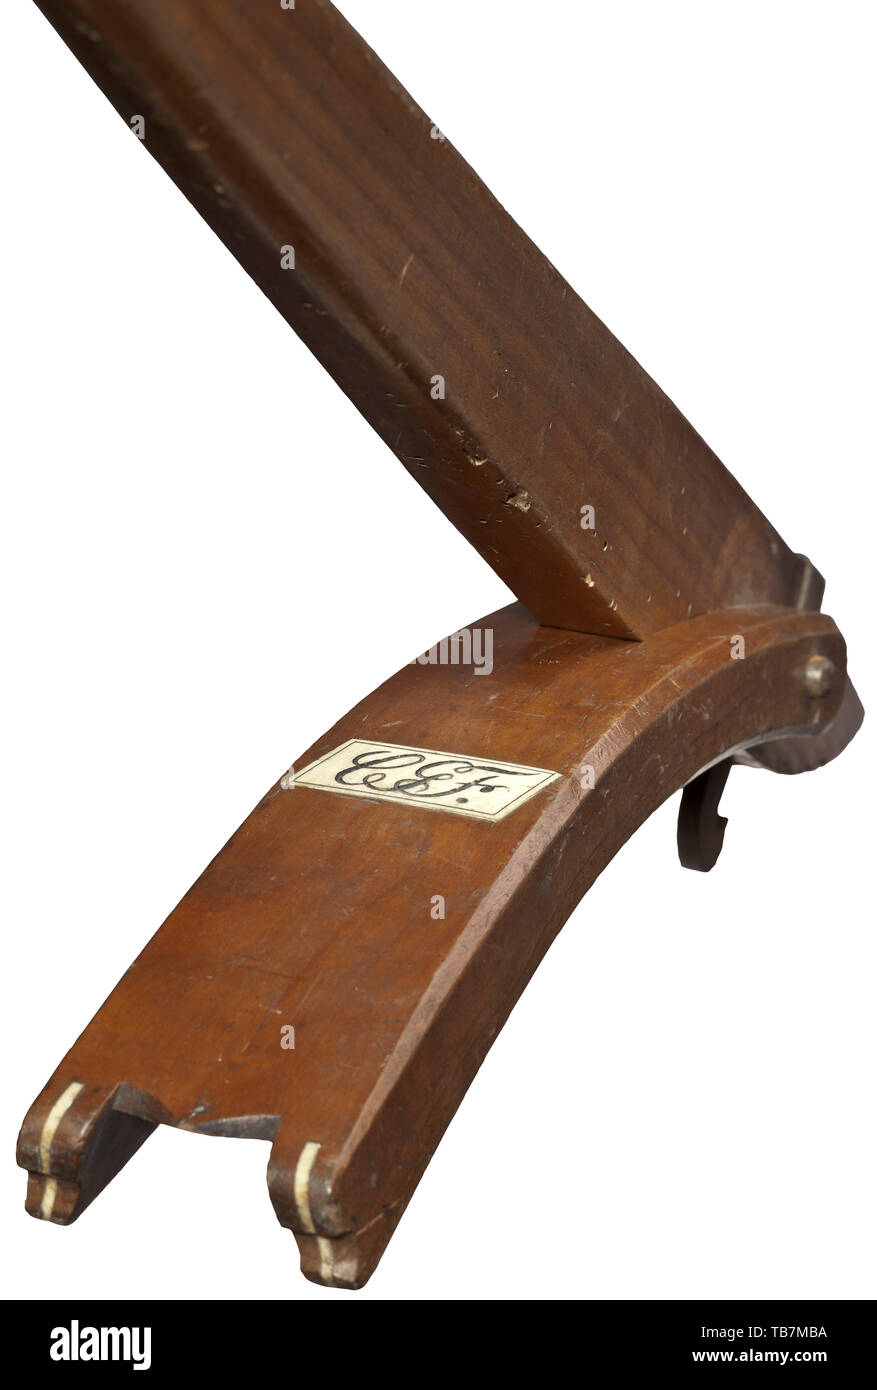 A Saxon sport crossbow with gaffle, circa 1830, Heavy iron prod with a later hemp string and original decorative woollen tassels. The inside of the bow embellished with floral ornaments. The original bridle of cord with tassels made of wool pompoms. The walnut tiller with quarrel groove and overlay of bone. Iron nut with brass bolt clip. Set trigger, iron finger rests. On the cheek an inlaid compass rose made from black horn and bone. Also, the corresponding wooden gaffle inlaid with a monogram plaque 'SGF' in bone. Length 80 cm. A typically heav, Additional-Rights-Clearance-Info-Not-Available Stock Photo